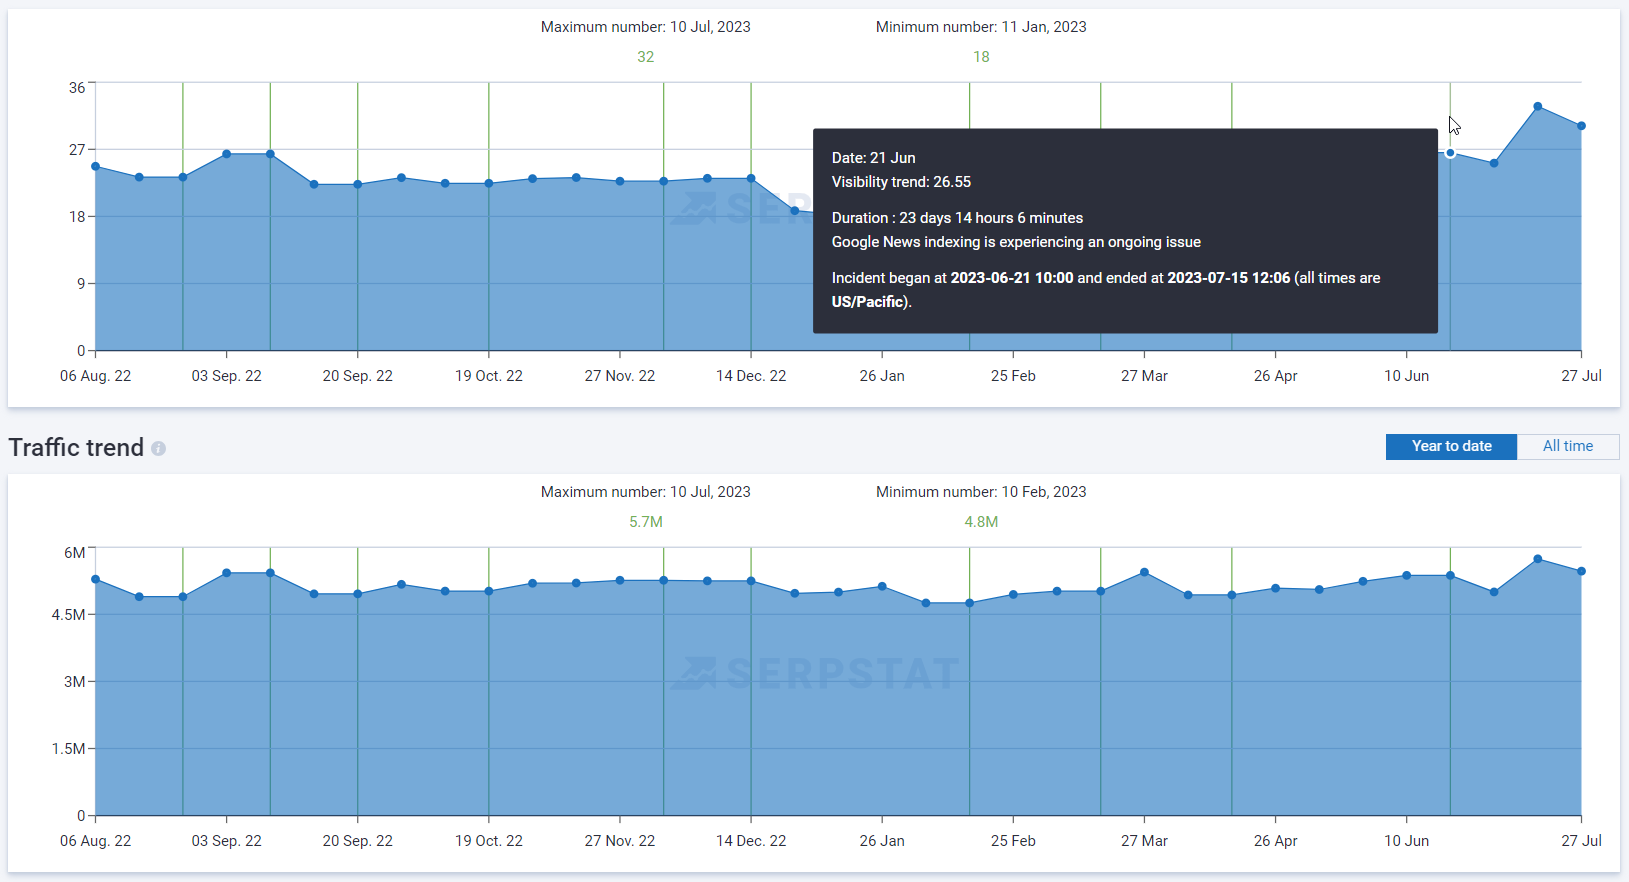 Google updates on Visibility, Traffic and Keyword trends.